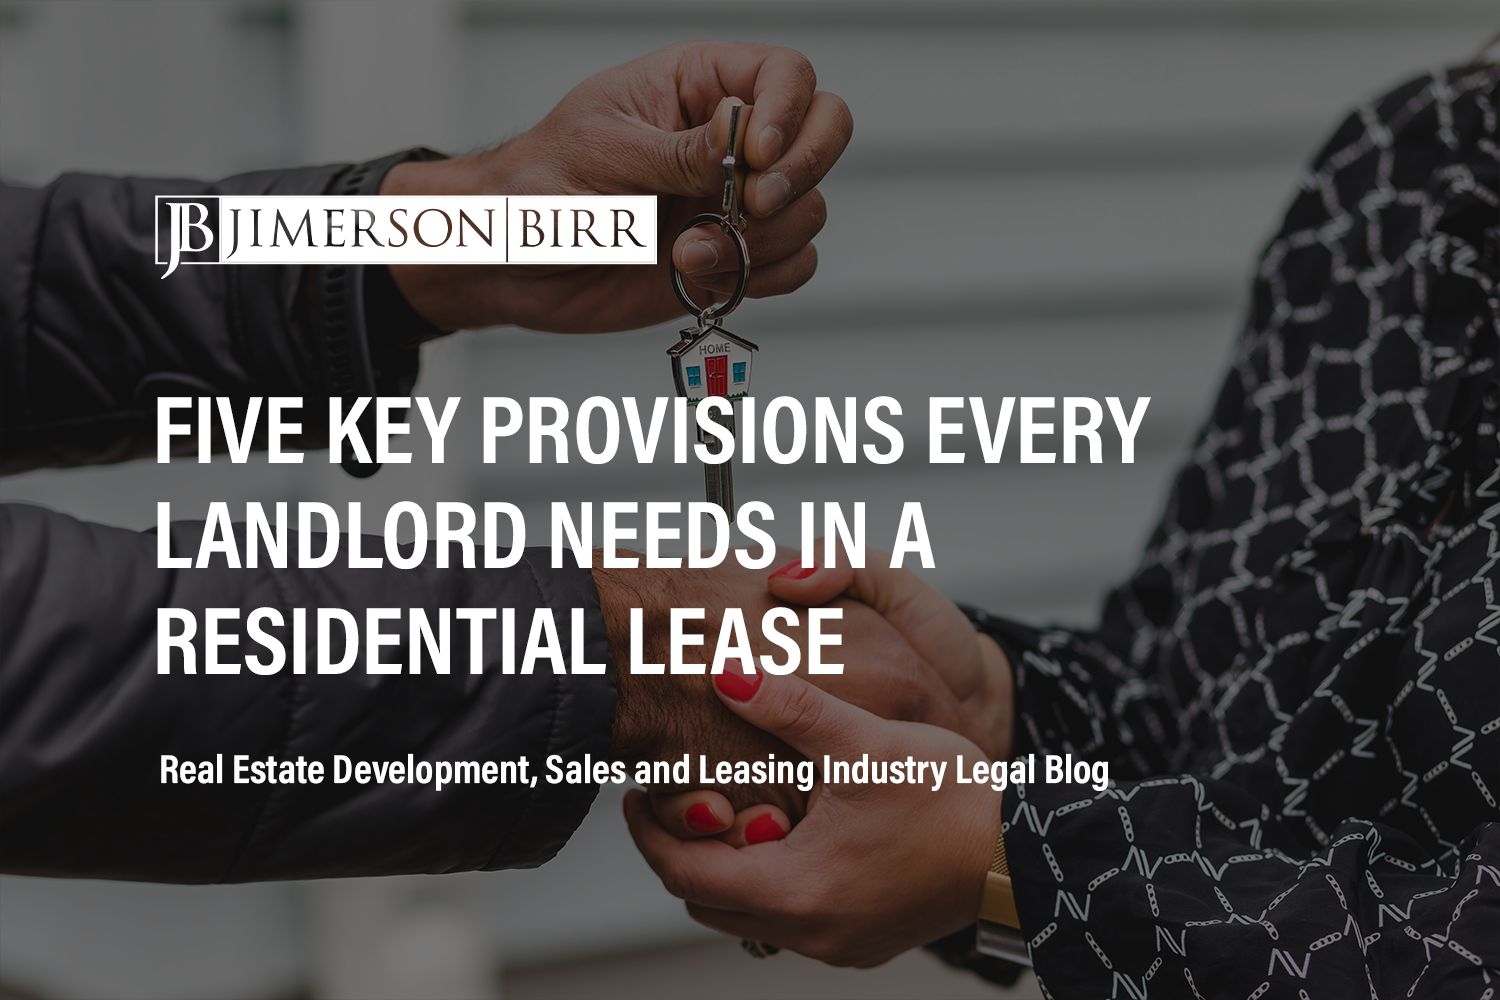 Five Key Provisions Every Landlord Needs in a Residential Lease